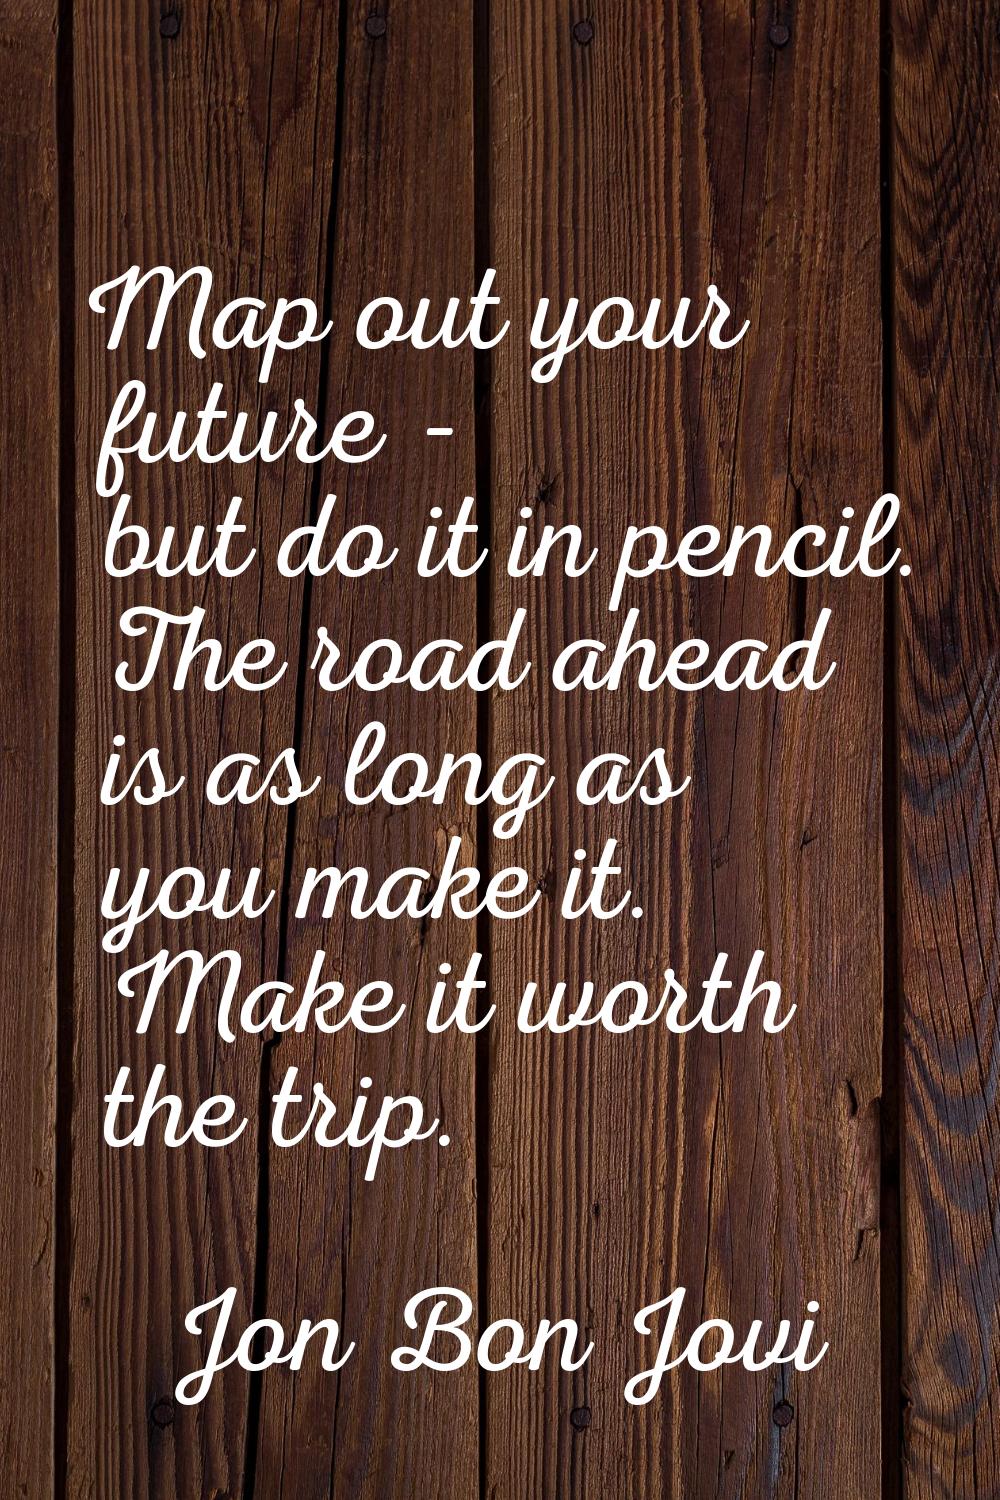 Map out your future - but do it in pencil. The road ahead is as long as you make it. Make it worth 